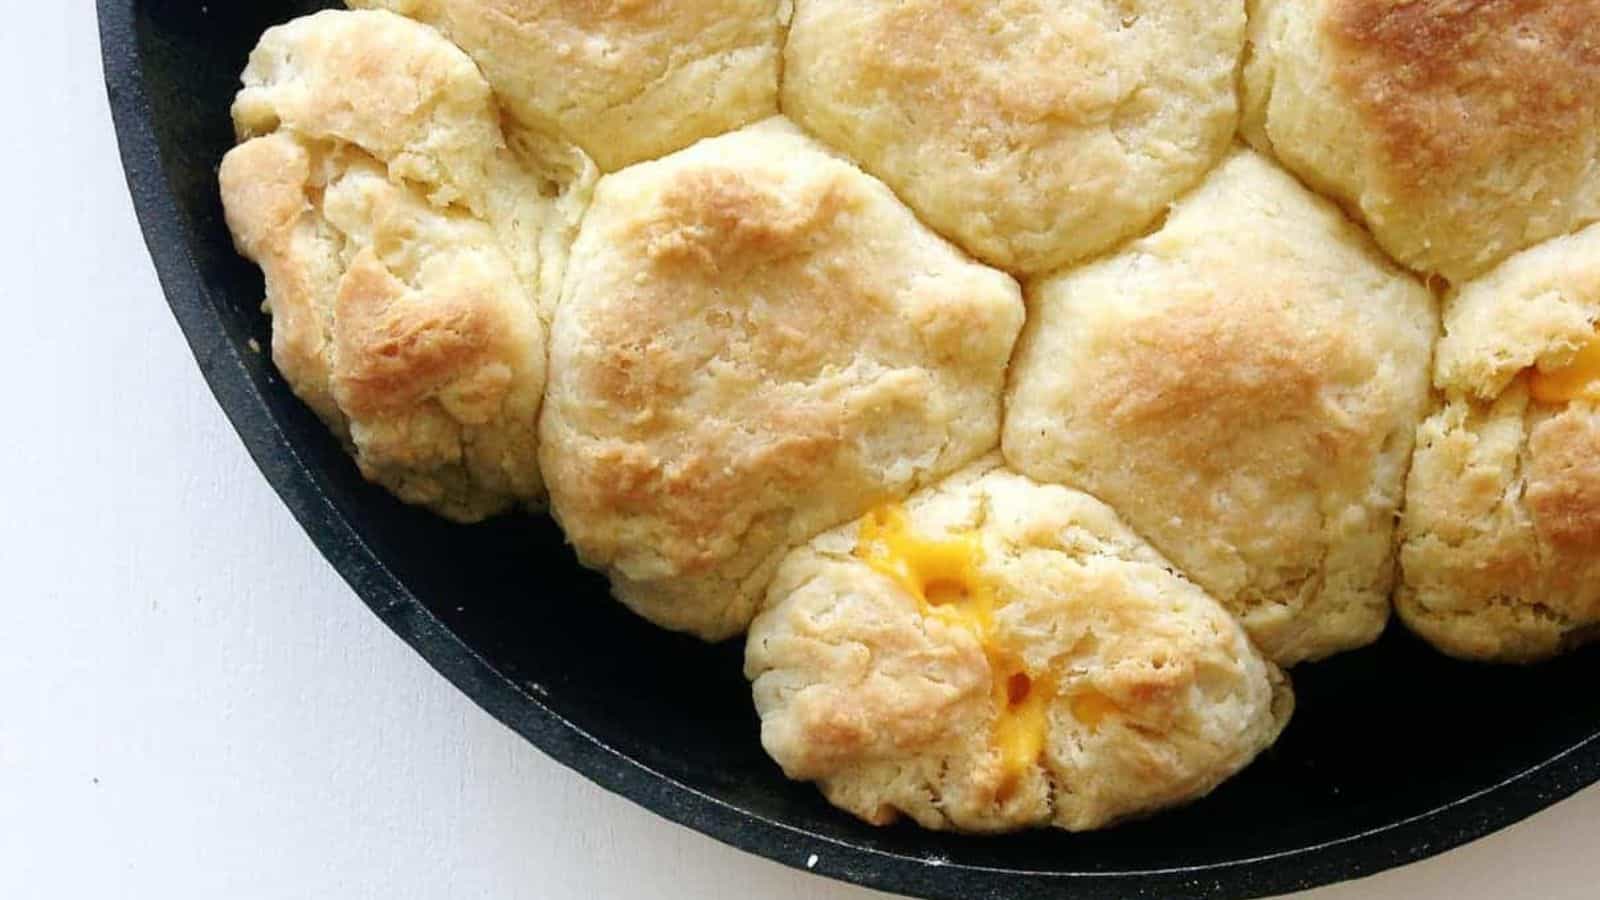 Cheesy biscuits in a skillet on a table.